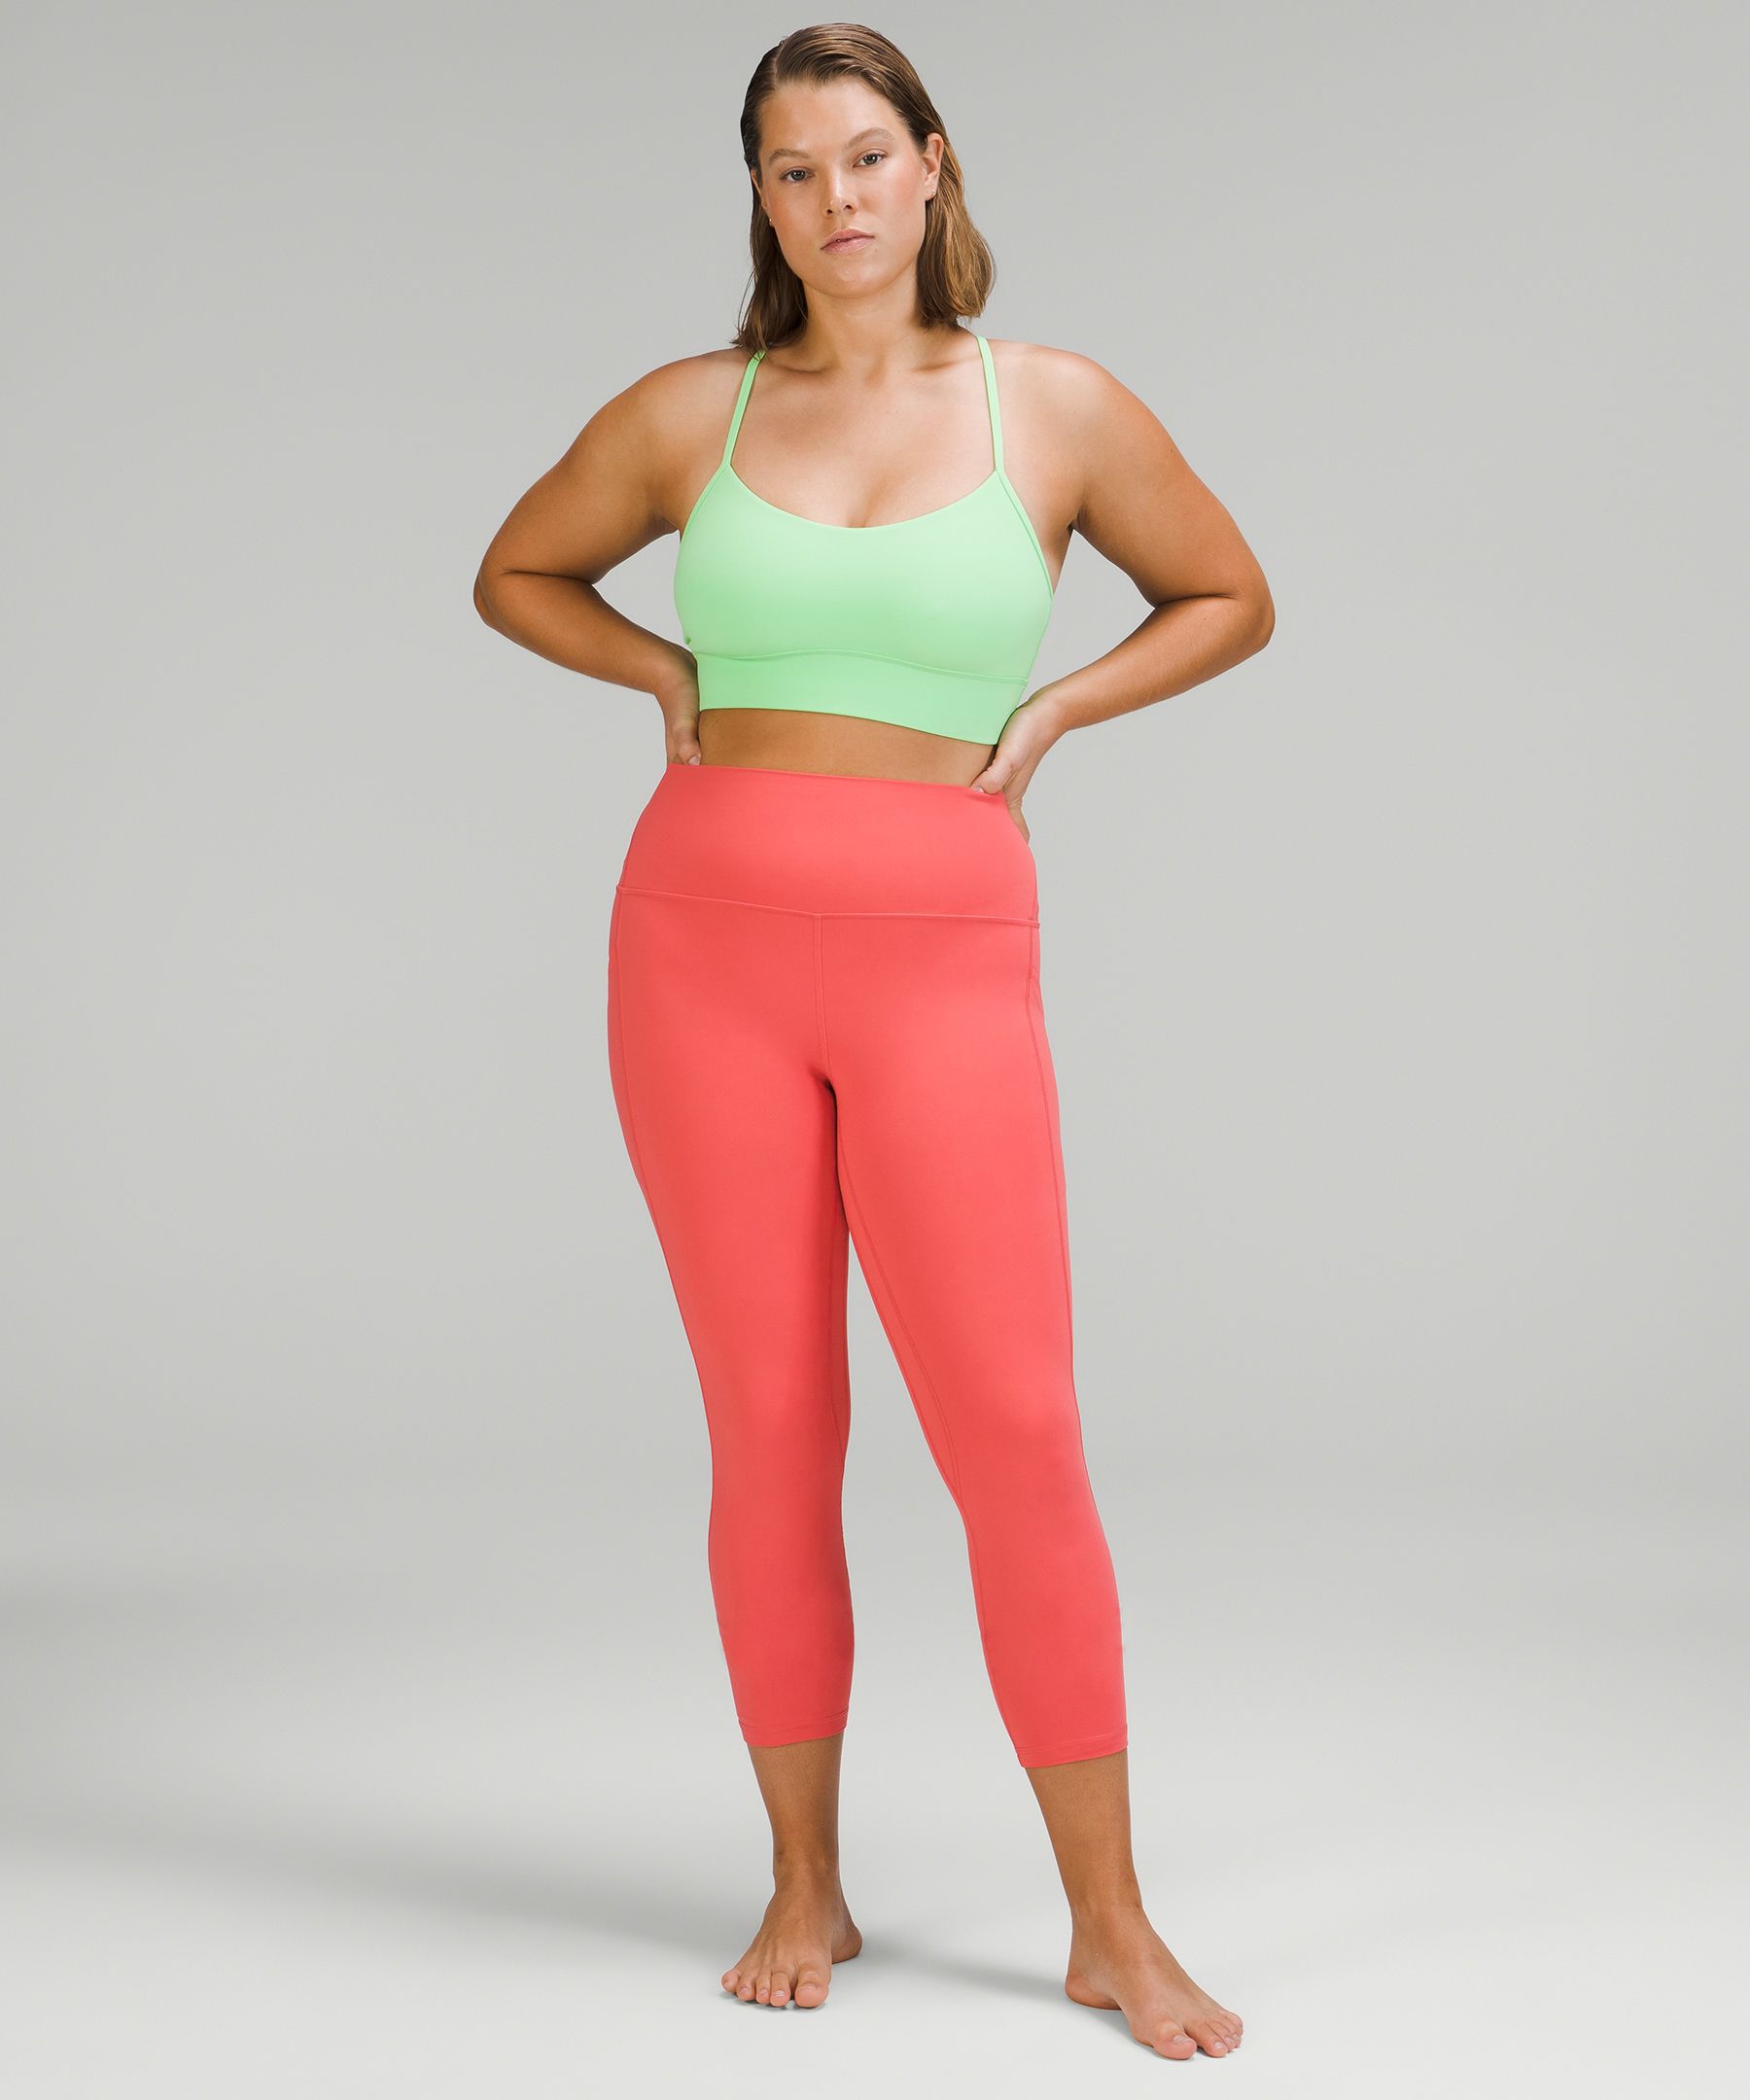 lululemon Align High-Rise Pant 25 Size 6 for Sale in Palisades